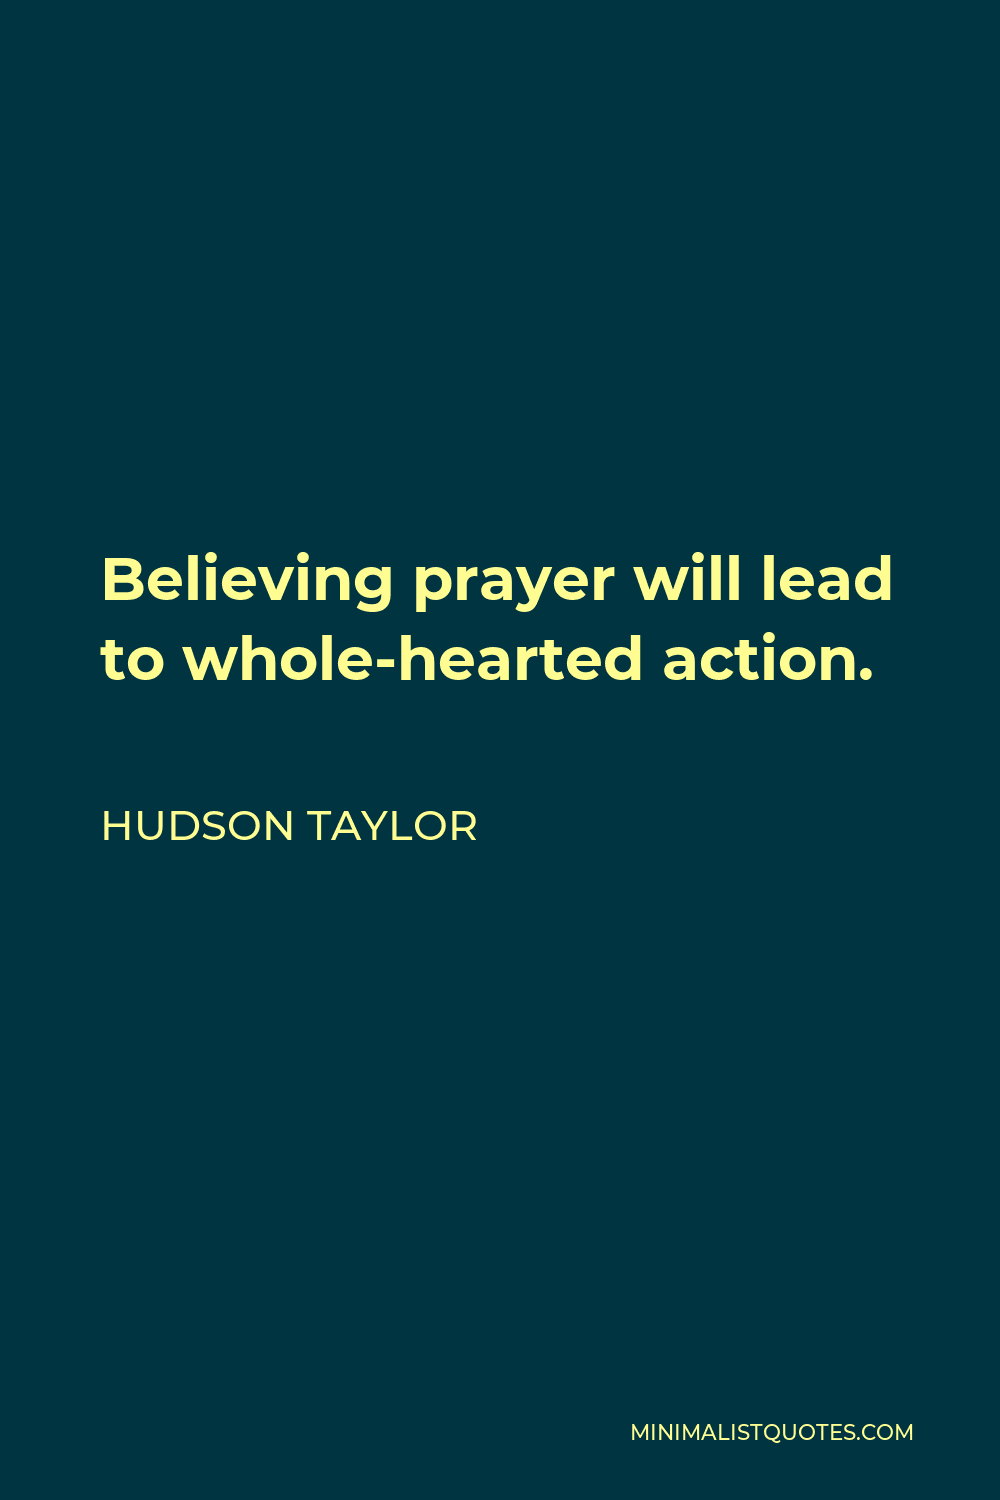 Hudson Taylor Quote - Believing prayer will lead to whole-hearted action.